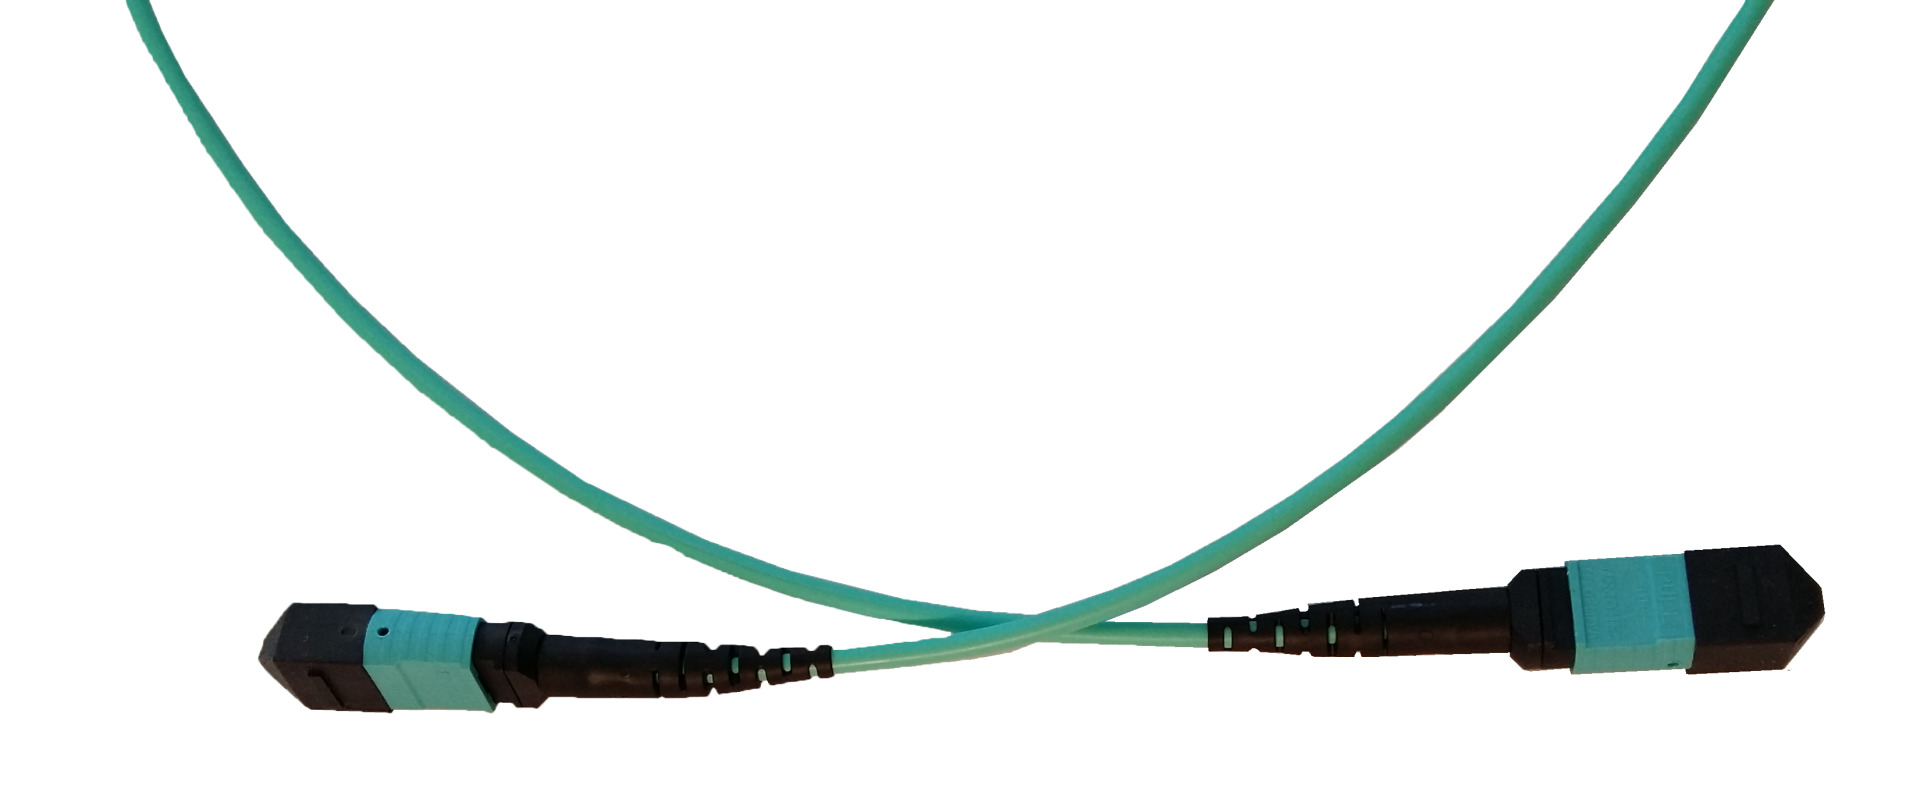 MTP/MPO Trunkcable 12 fiber MM OM3, 25m,Turquise, dobb.jacket OD=4,5mm